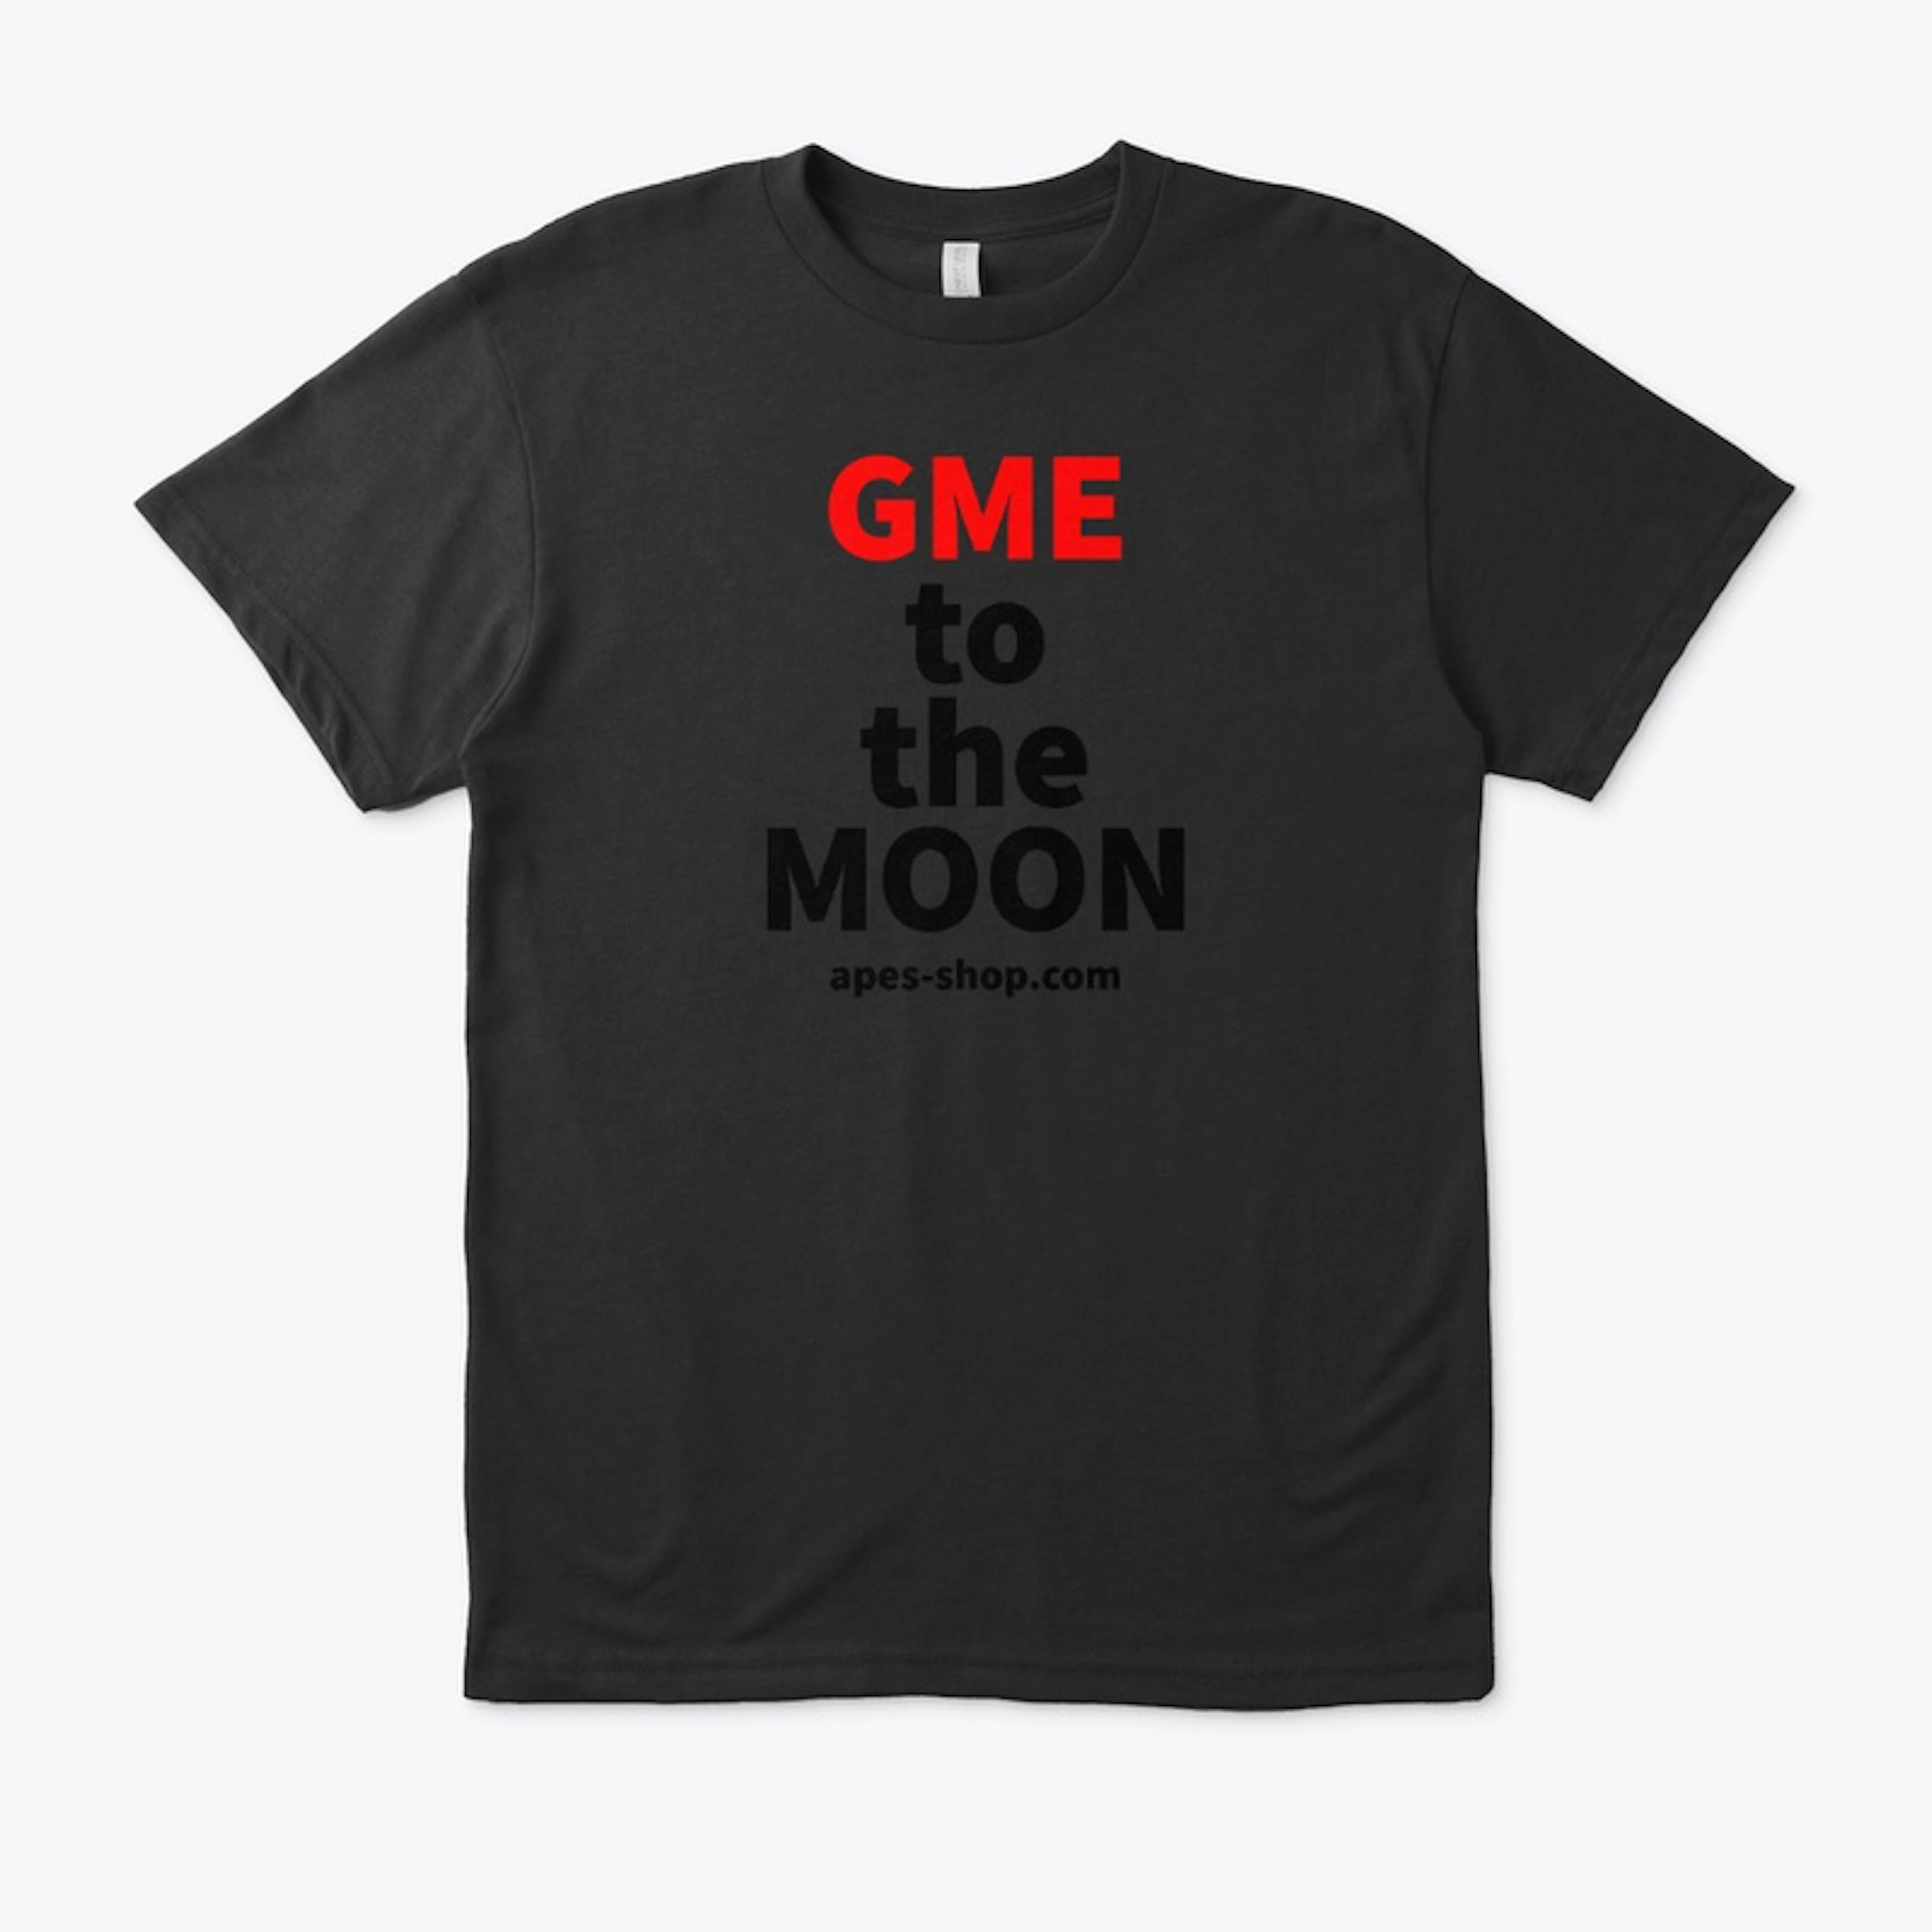 GME to the MOON -fellow apes